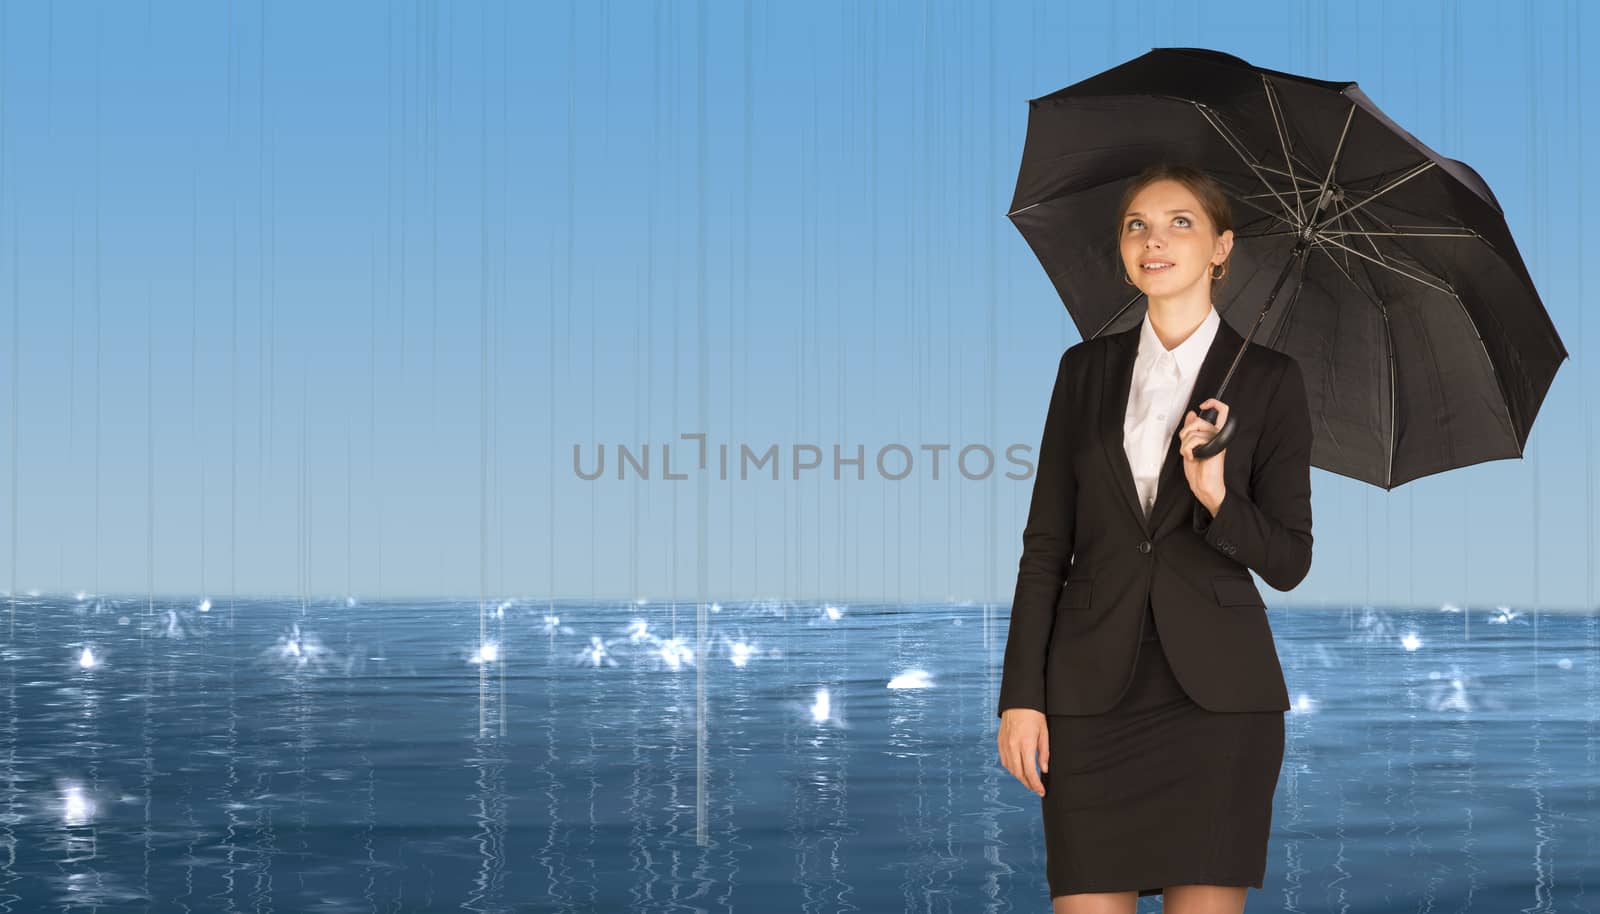 Businesswoman holding umbrella. Rain and surface waters as backdrop